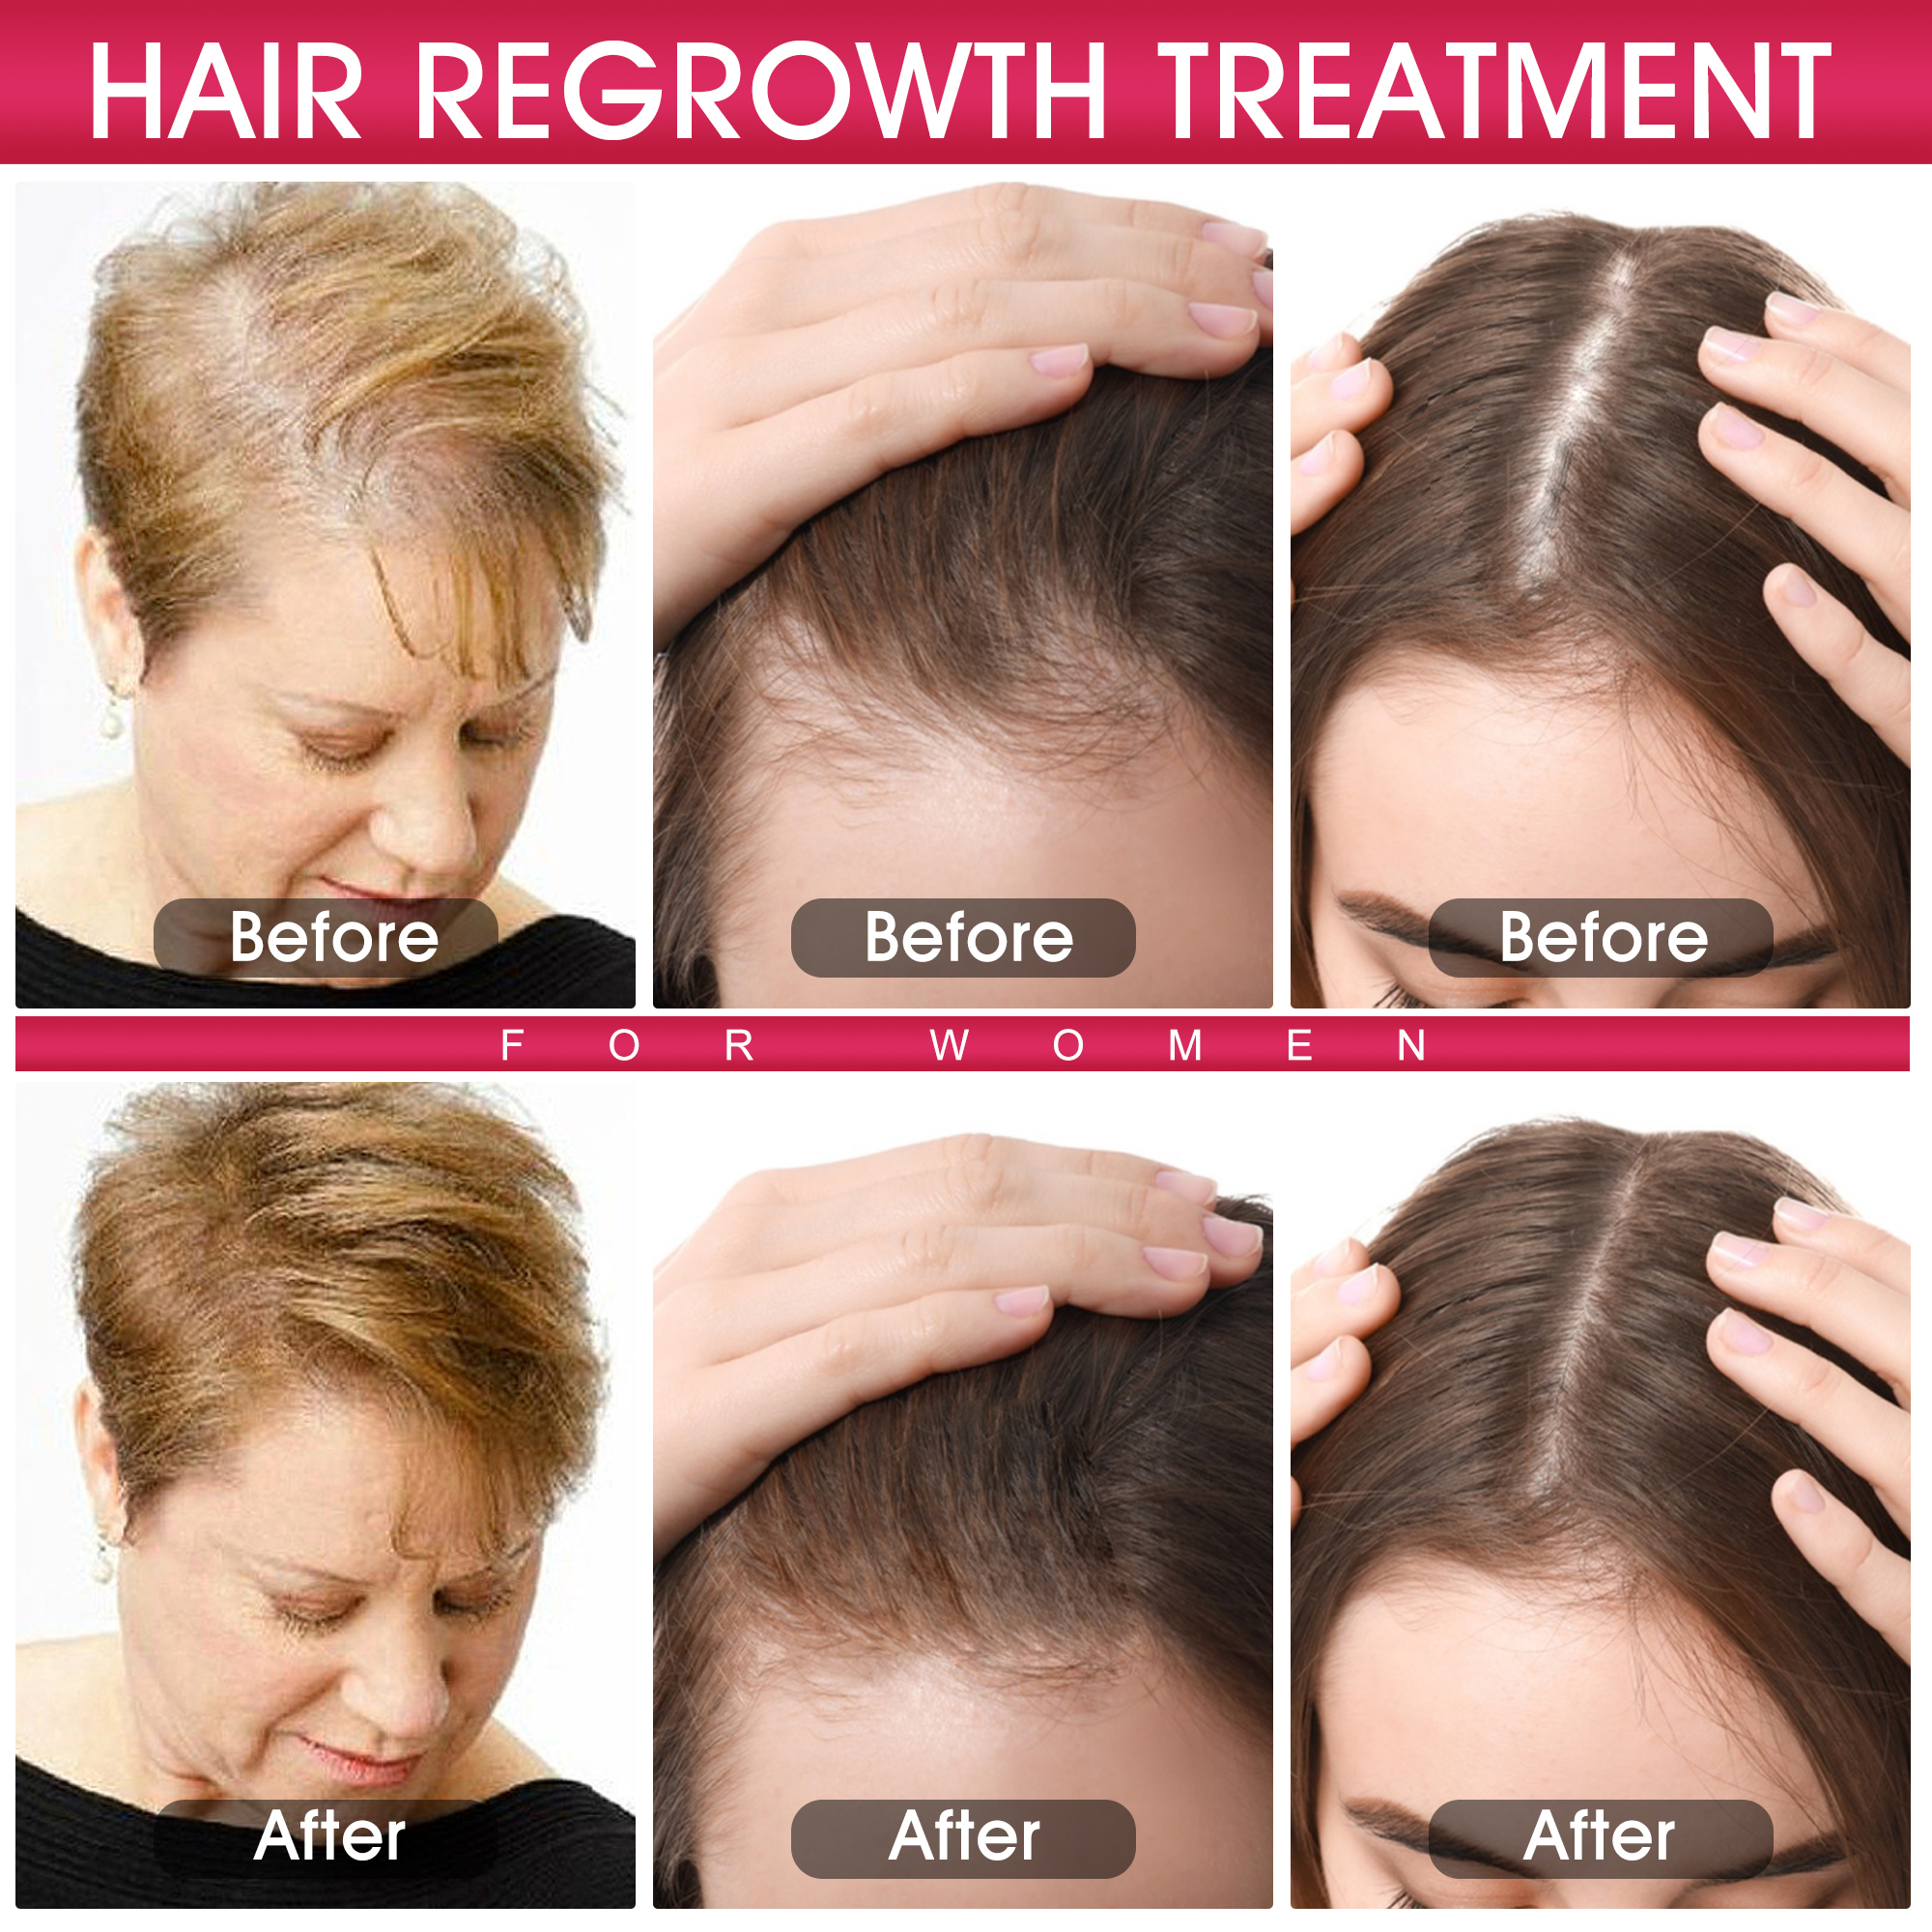 Hair fall and its treatment. | Ability India